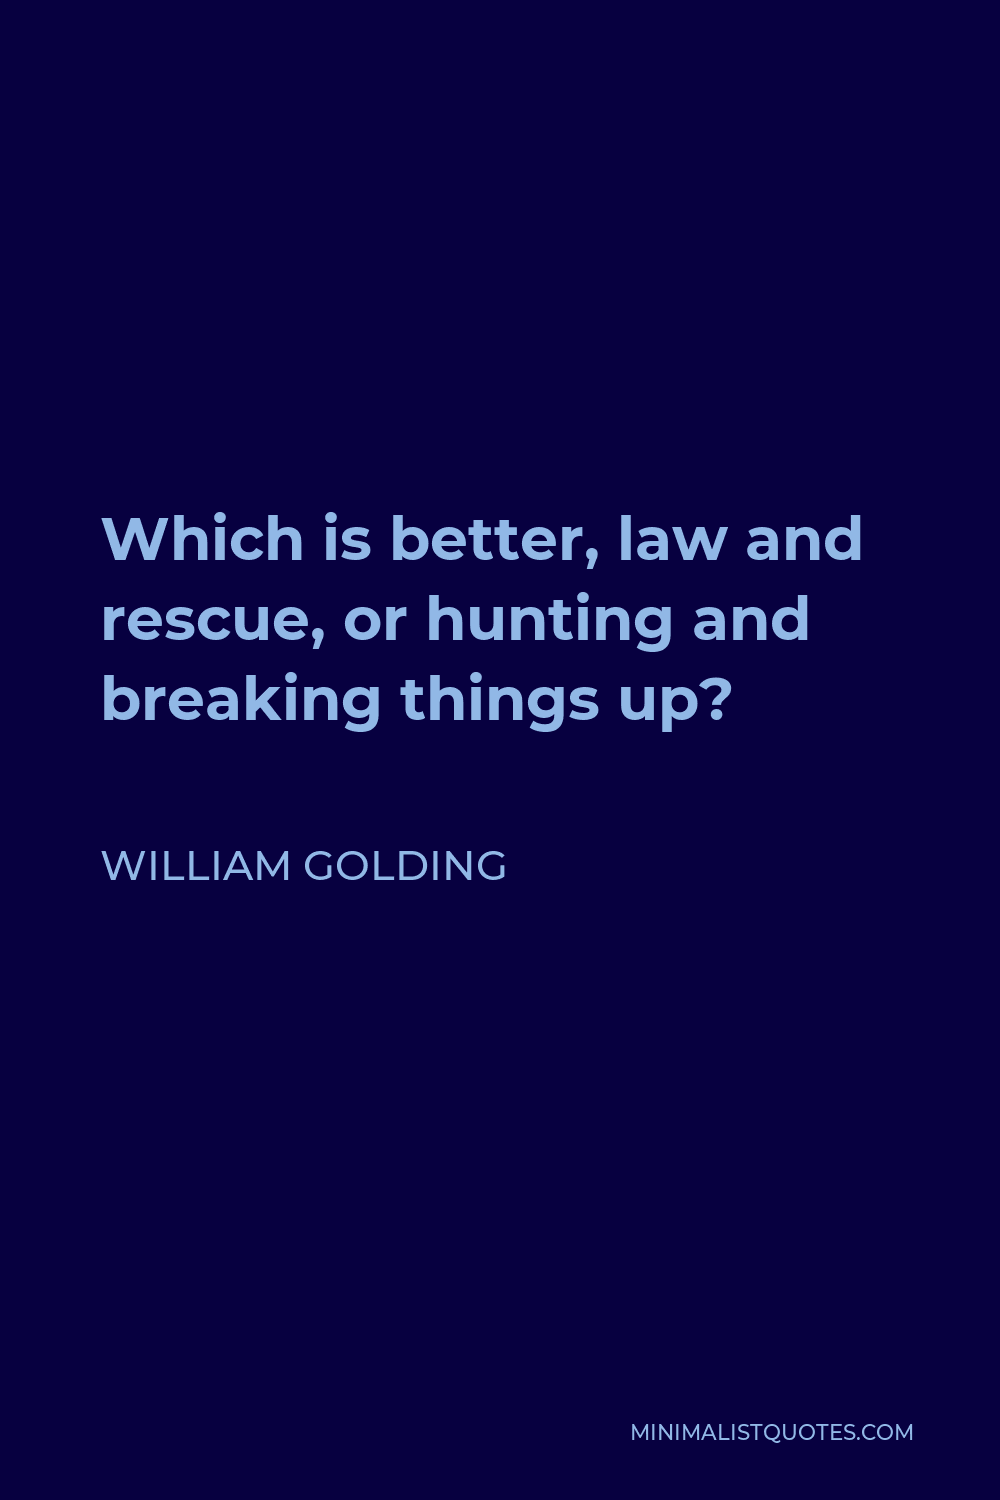 William Golding Quote - Which is better, law and rescue, or hunting and breaking things up?